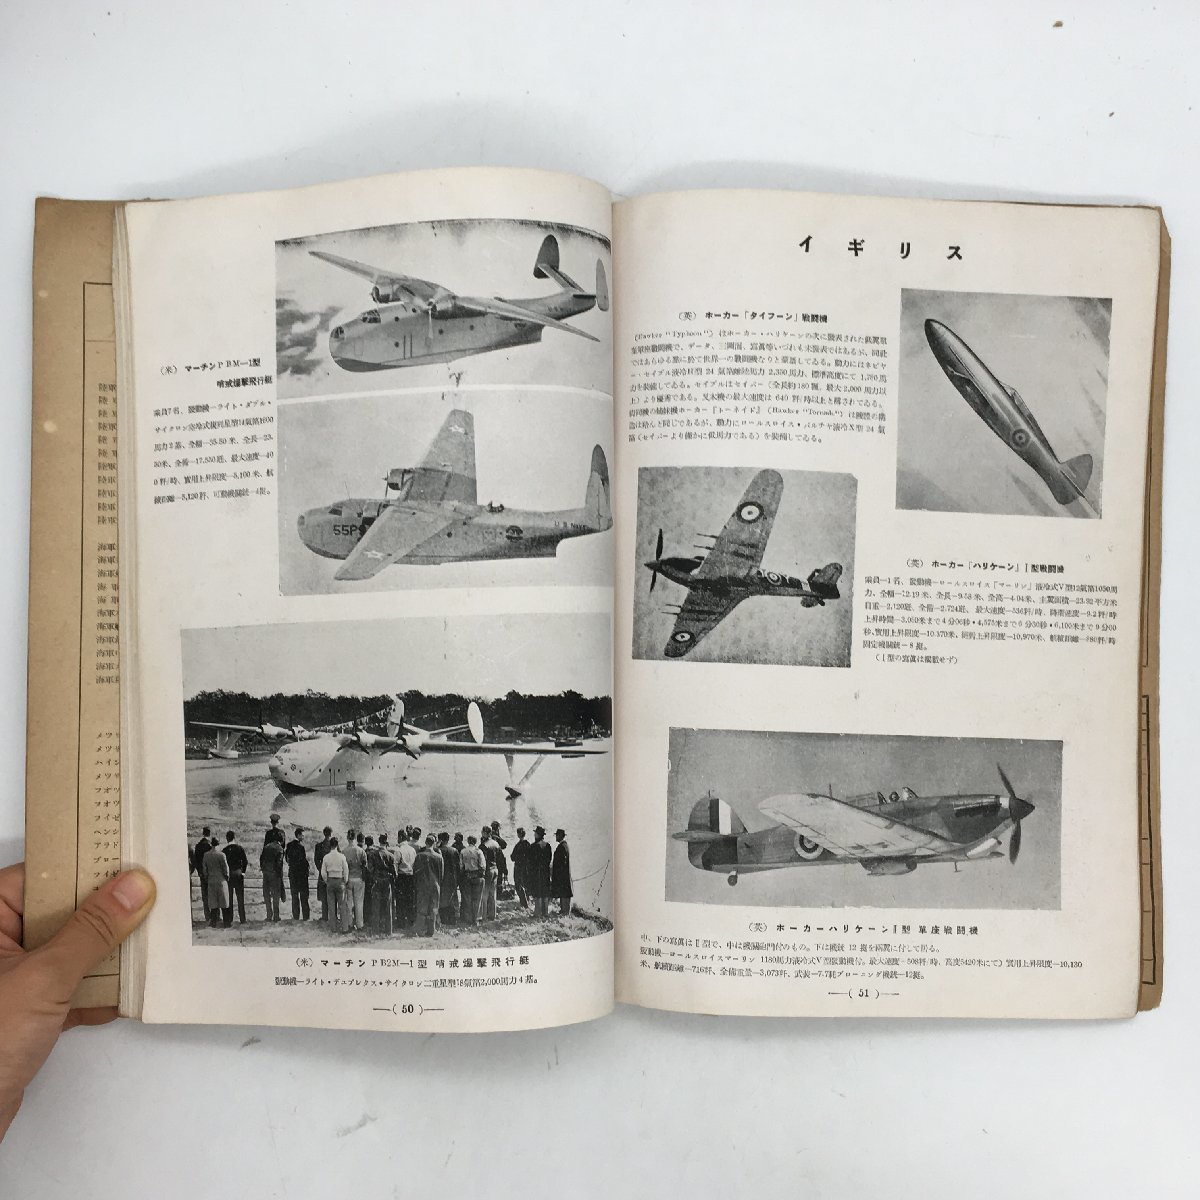 [ empty special increase . row country. warplane ] Showa era 17 year version no. 9 volume 9 number . person company war front magazine old photograph old Japan army army . materials writing .